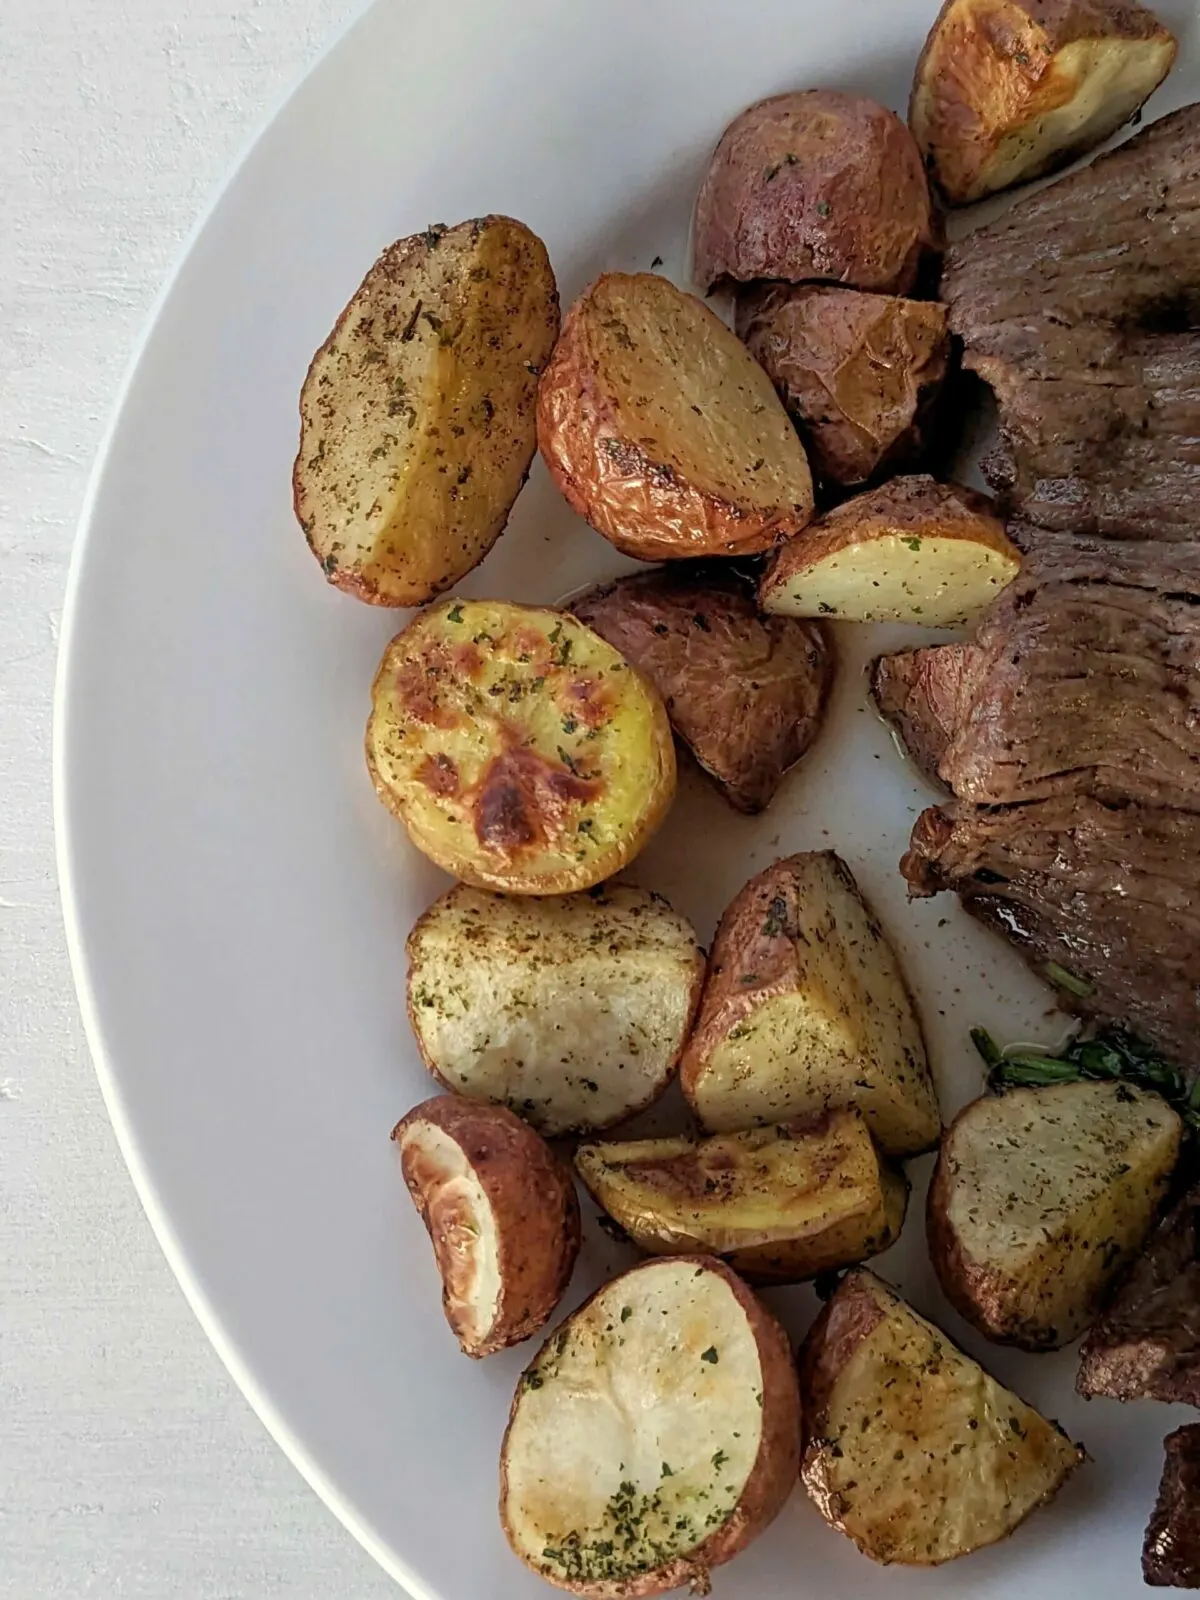 Roasted potatoes on a serving plate.